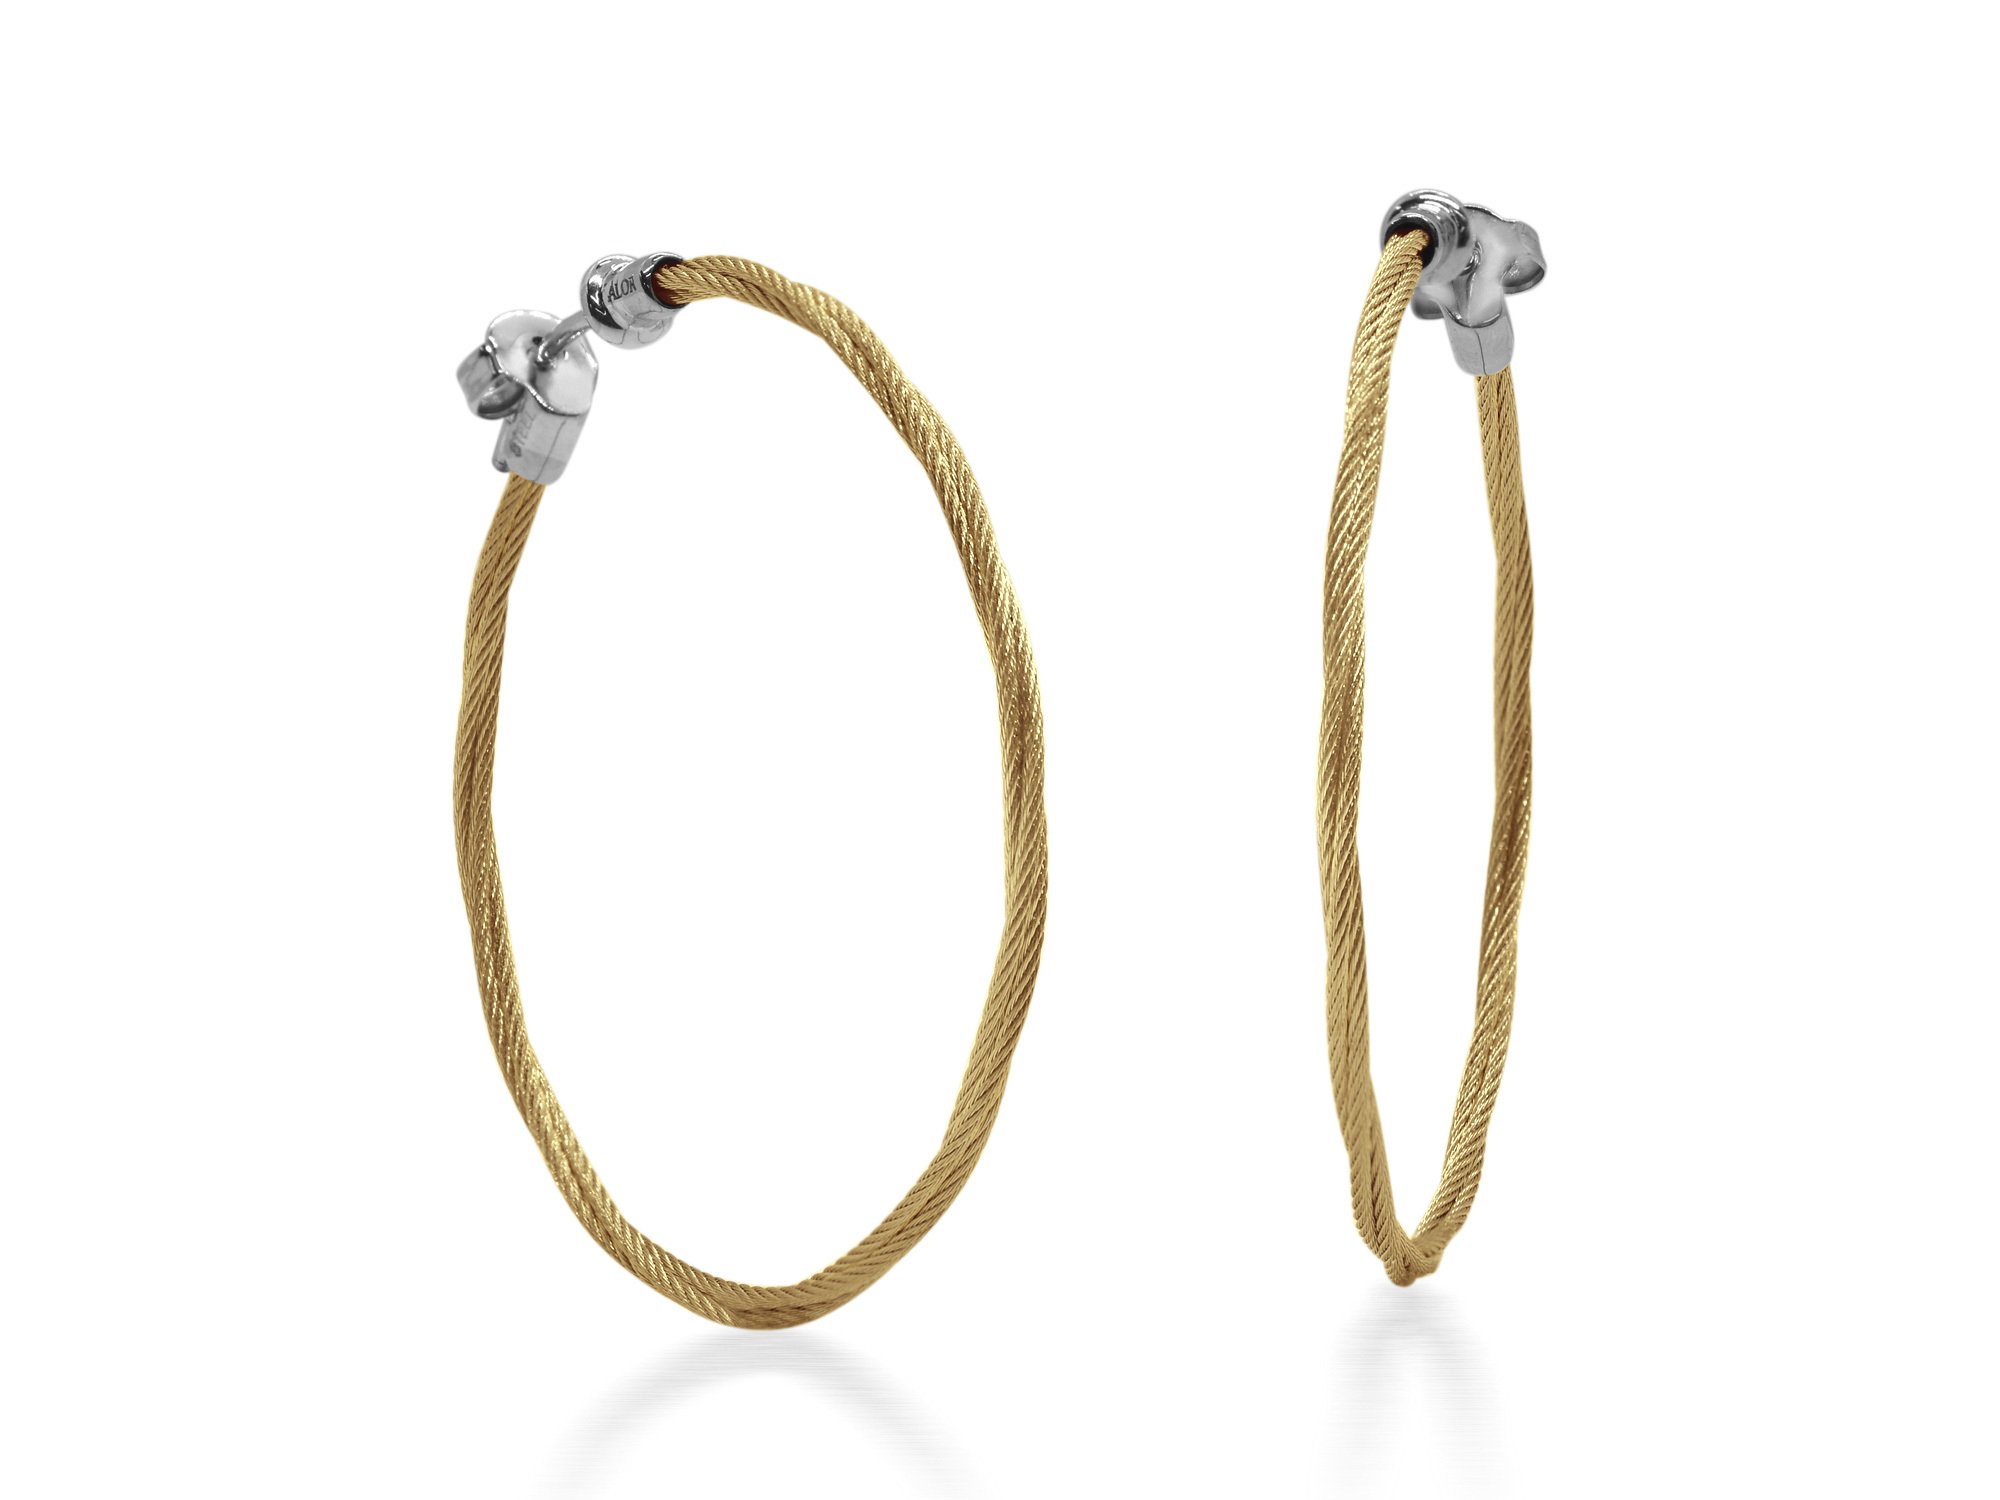 Yellow Cable 1.5? Hoop Earrings with 18kt White Gold